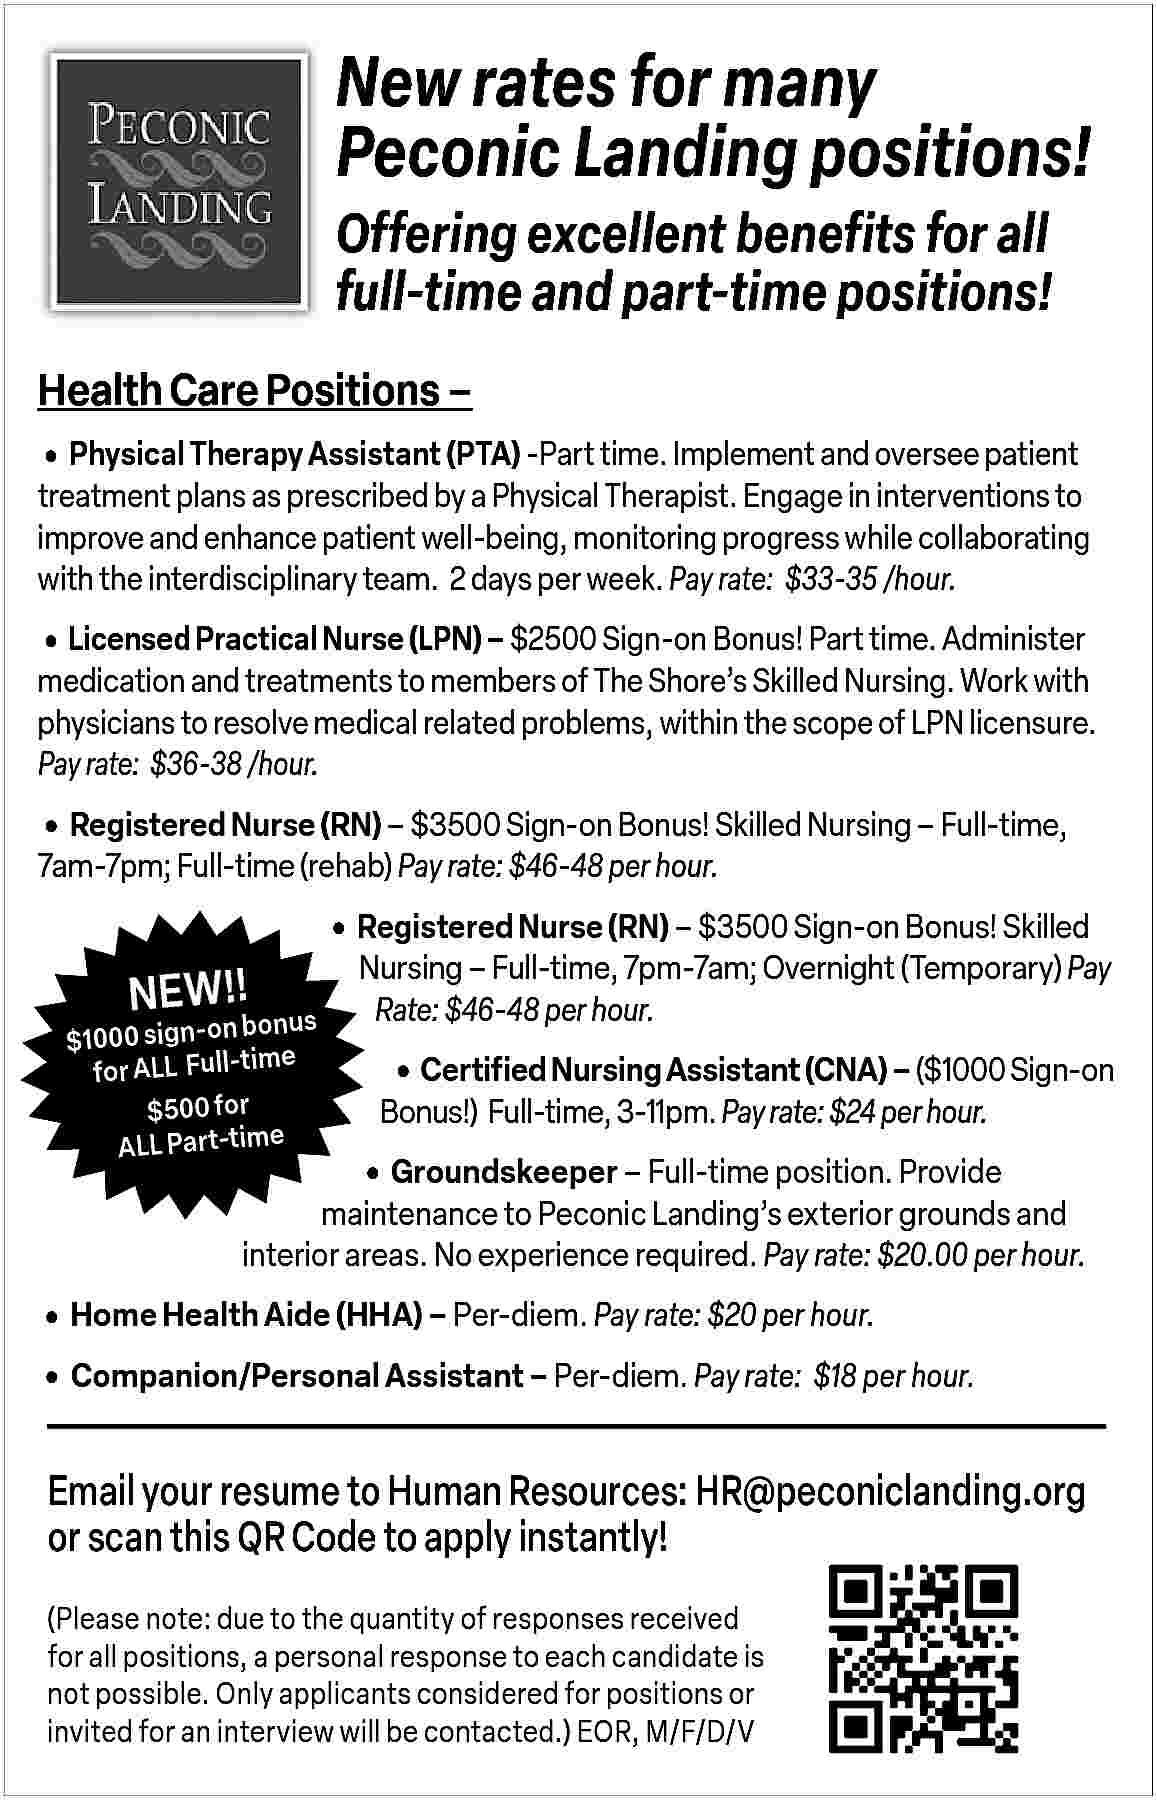 New rates for many <br>Peconic  New rates for many  Peconic Landing positions!  Offering excellent benefits for all  full-time and part-time positions!  Health Care Positions               Physical Therapy Assistant (PTA) -Part time. Implement and oversee patient  treatment plans as prescribed by a Physical Therapist. Engage in interventions to  improve and enhance patient well-being, monitoring progress while collaborating  with the interdisciplinary team. 2 days per week. Pay rate: $33-35 /hour.        Licensed Practical Nurse (LPN)     $2500 Sign-on Bonus! Part time. Administer    medication and treatments to members of The Shore   s Skilled Nursing. Work with  physicians to resolve medical related problems, within the scope of LPN licensure.  Pay rate: $36-38 /hour.        Registered Nurse (RN)     $3500 Sign-on Bonus! Skilled Nursing     Full-time,  7am-7pm; Full-time (rehab) Pay rate: $46-48 per hour.    NEW!!    bonus  $1000 sign-on  e  for ALL   Full-tim  $500 for  ALL Part-time        Registered Nurse (RN)     $3500 Sign-on Bonus! Skilled    Nursing     Full-time, 7pm-7am; Overnight (Temporary) Pay  Rate: $46-48 per hour.           Certified Nursing Assistant (CNA)     ($1000 Sign-on  Bonus!) Full-time, 3-11pm. Pay rate: $24 per hour.           Groundskeeper     Full-time position. Provide  maintenance to Peconic Landing   s exterior grounds and  interior areas. No experience required. Pay rate: $20.00 per hour.        Home Health Aide (HHA)     Per-diem. Pay rate: $20 per hour.      Companion/Personal Assistant     Per-diem. Pay rate: $18 per hour.    Email your resume to Human Resources: HR@peconiclanding.org  or scan this QR Code to apply instantly!  (Please note: due to the quantity of responses received  for all positions, a personal response to each candidate is  not possible. Only applicants considered for positions or  invited for an interview will be contacted.) EOR, M/F/D/V     